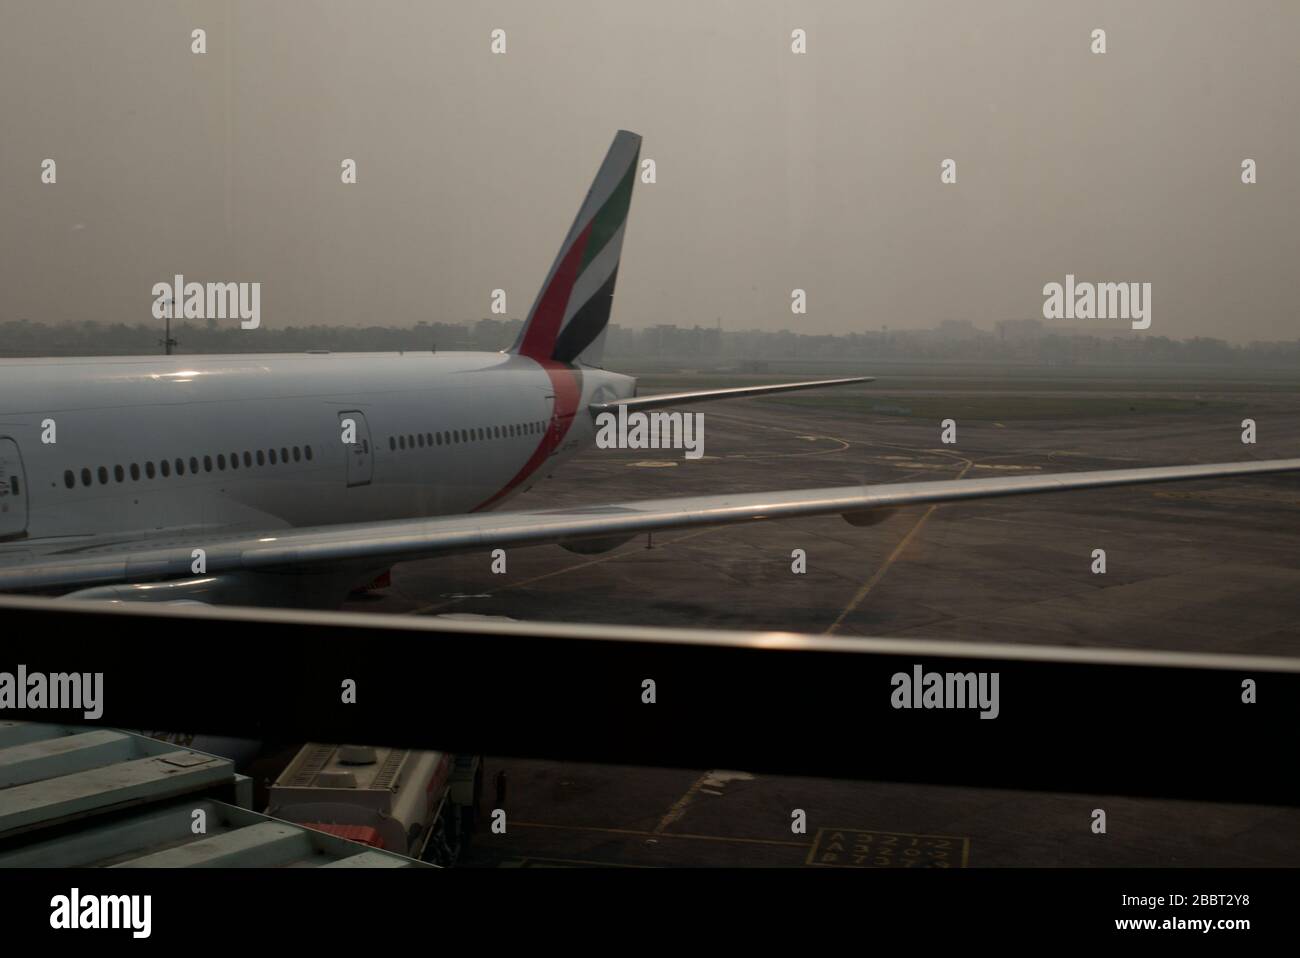 Emirate airline aircraft on tarmac refuelling Stock Photo